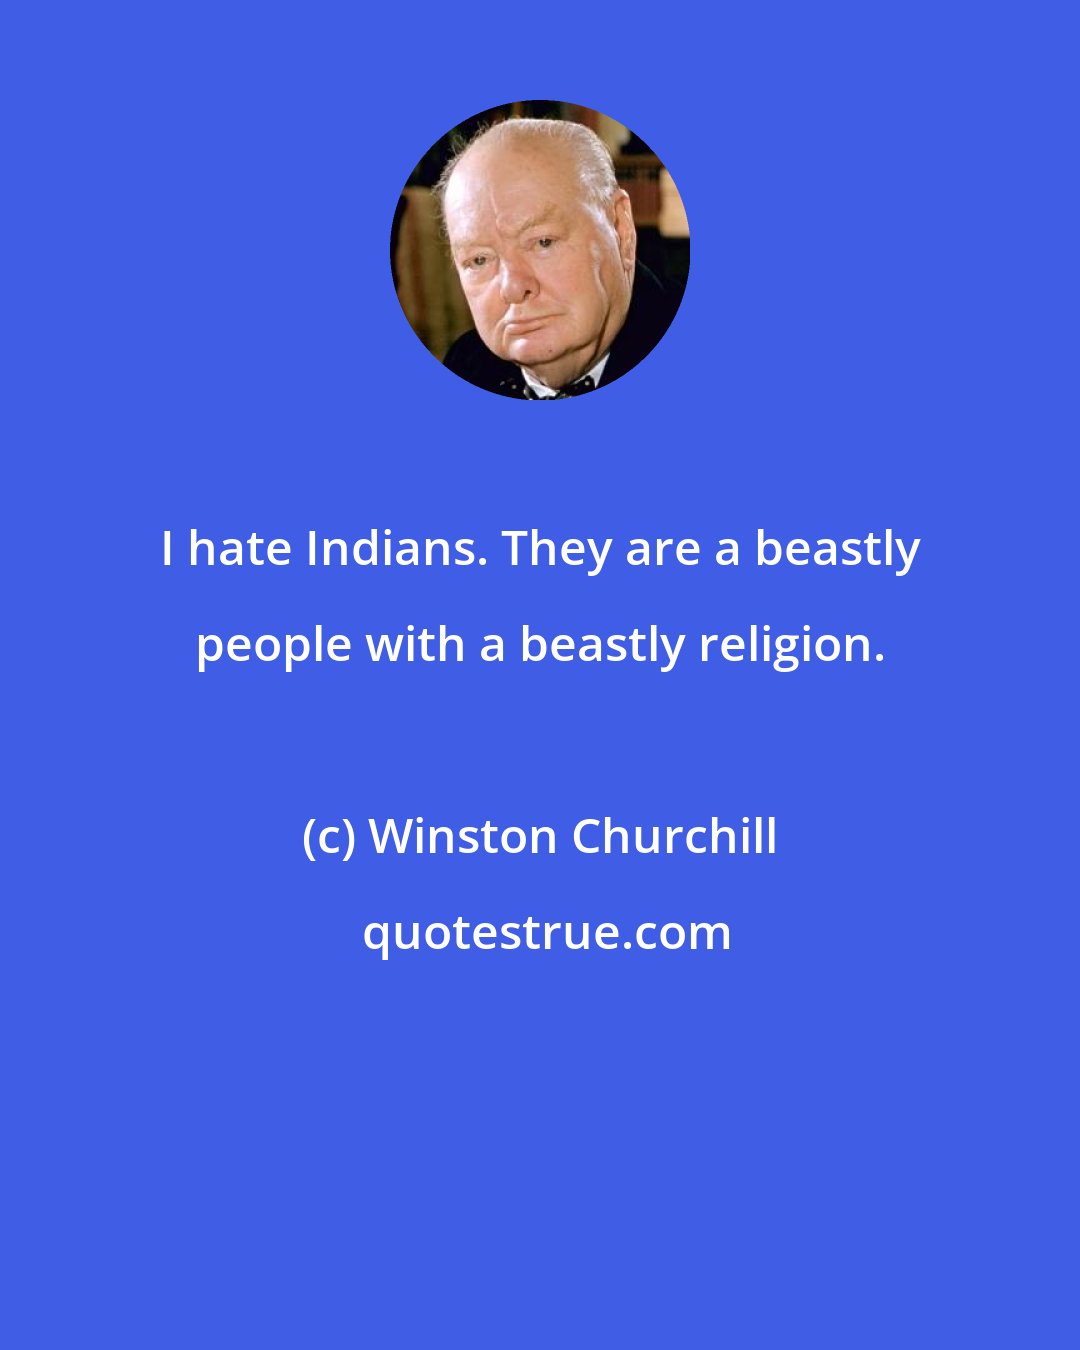 Winston Churchill: I hate Indians. They are a beastly people with a beastly religion.